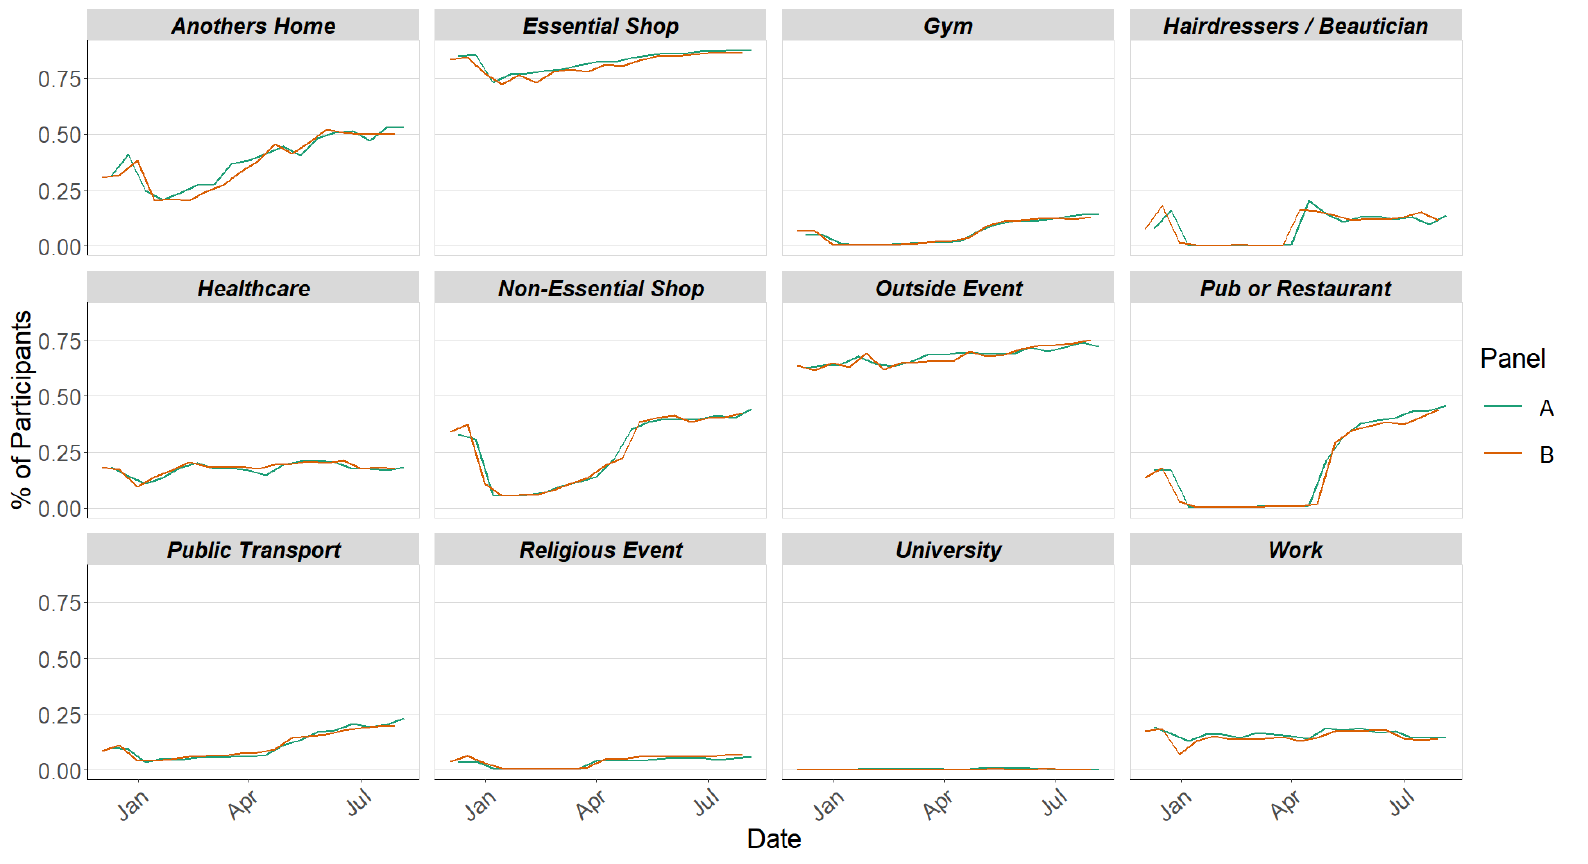 Figure 7. A series of line graphs showing locations visited by participants at least once for panel A and B in various settings.